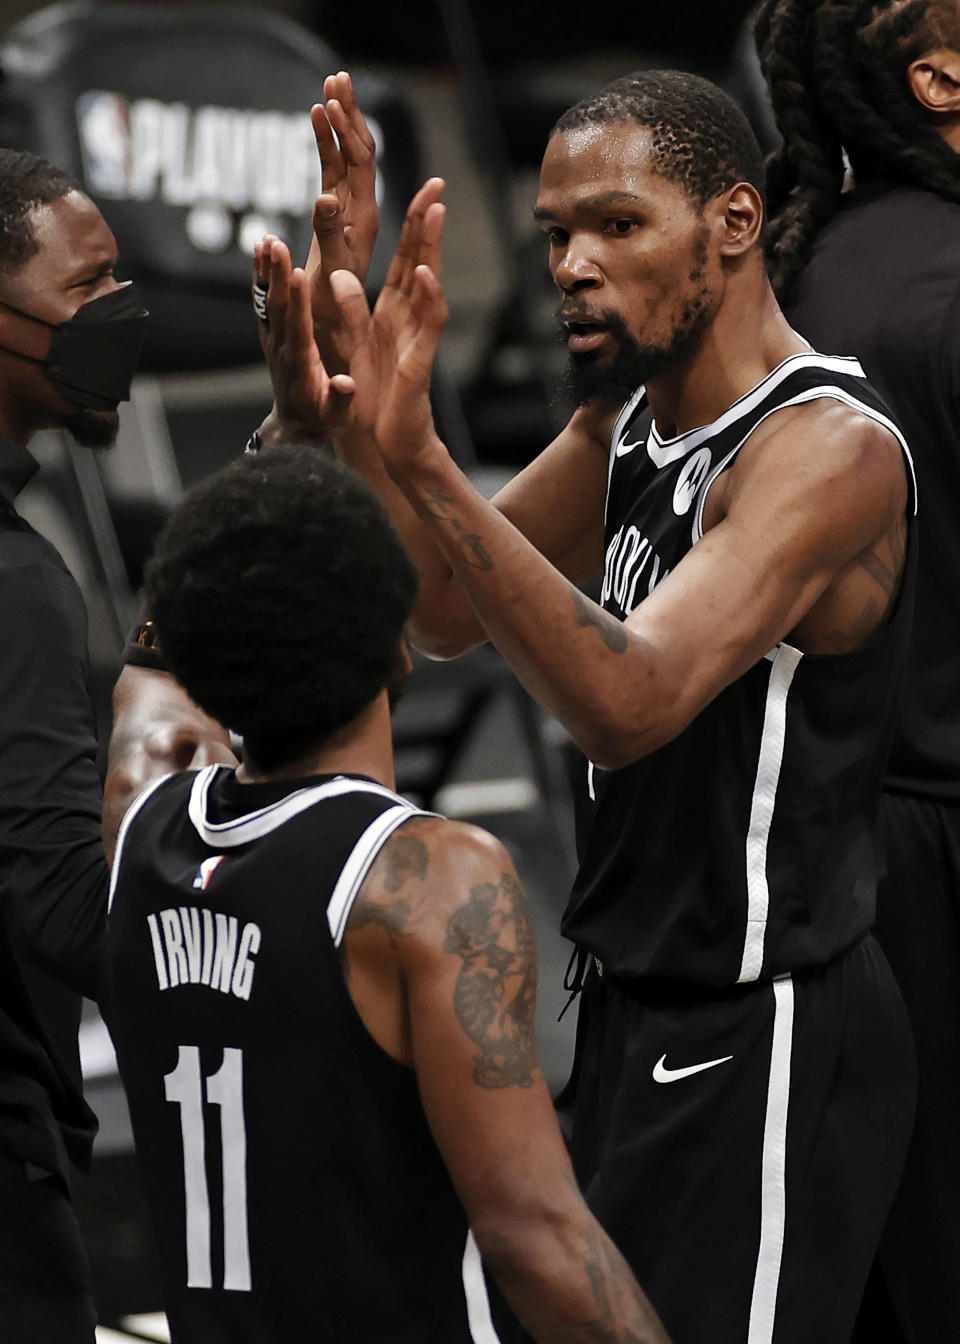 Brooklyn Nets forward Kevin Durant high-fives Kyrie Irving (11) during the second half of Game 1 of the team's NBA basketball second-round playoff series against the Milwaukee Bucks on Saturday, June 5, 2021, in New York. The Nets won 115-107. (AP Photo/Adam Hunger)